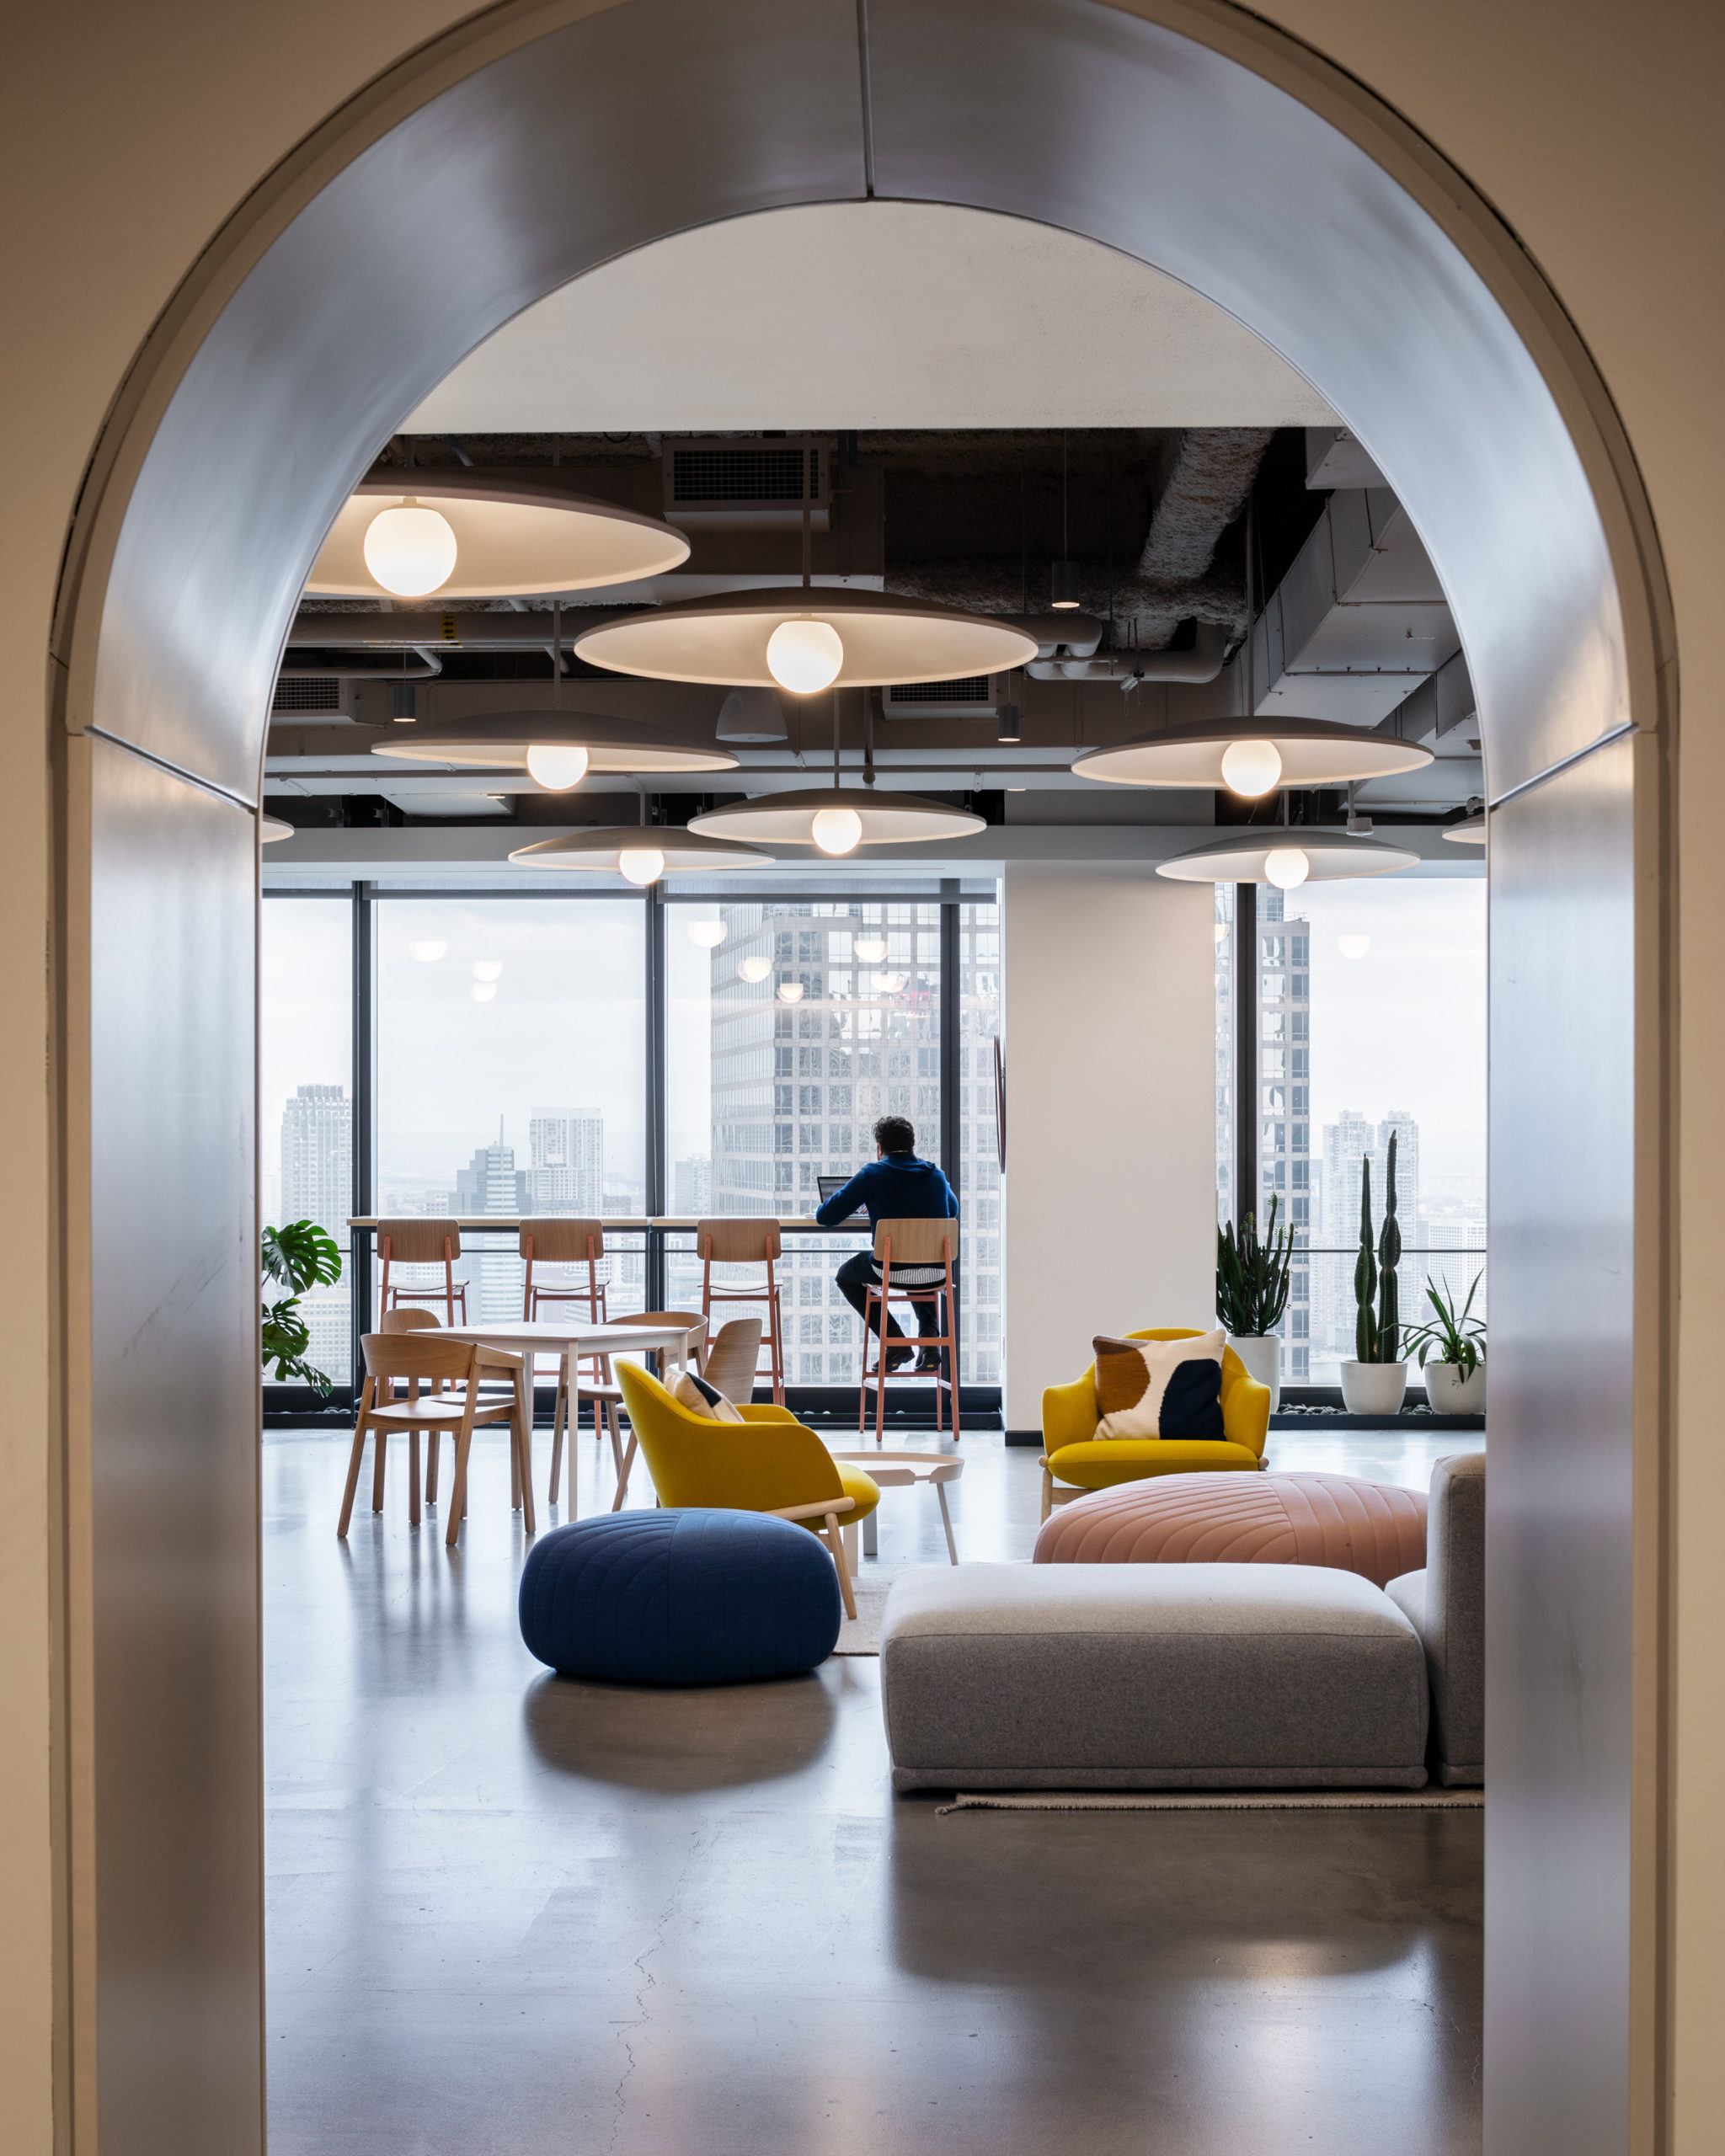 Interiors Citation Award: Casper New York Headquarters by Architecture Research Office, in New York, NY. Photo: James Ewing.